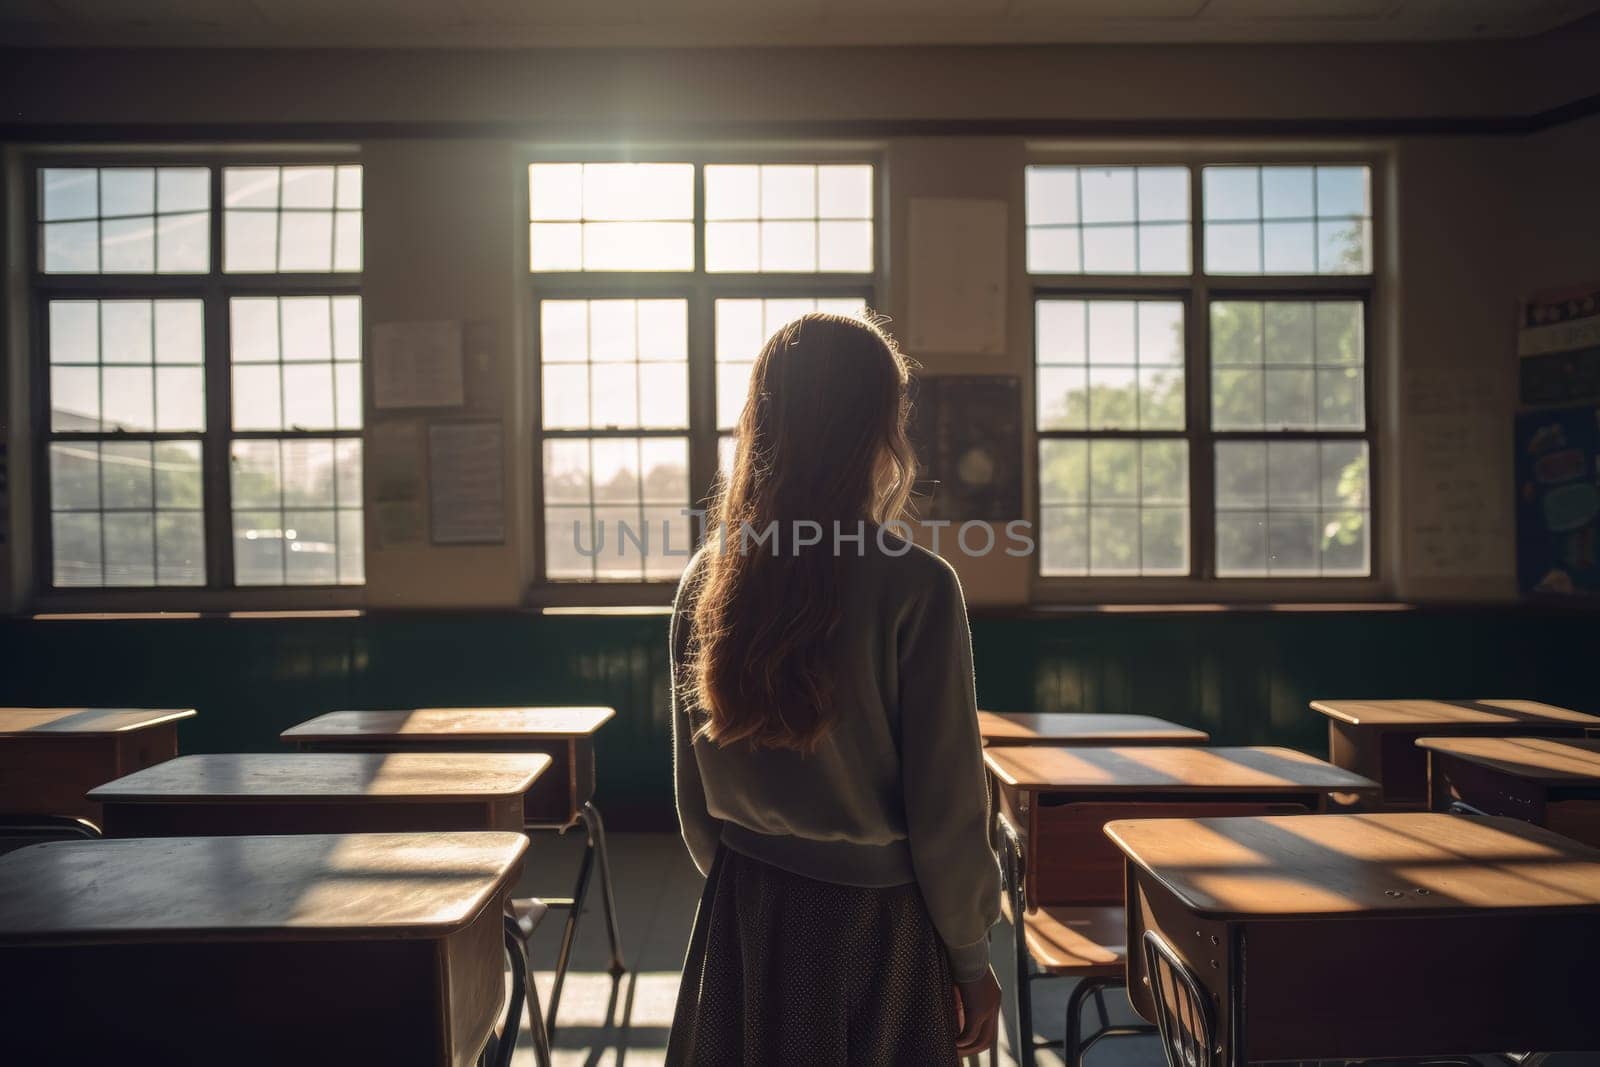 A contemplative teacher stands in the warm glow of an empty classroom, the golden sunlight casting shadows and a sense of calm solitude